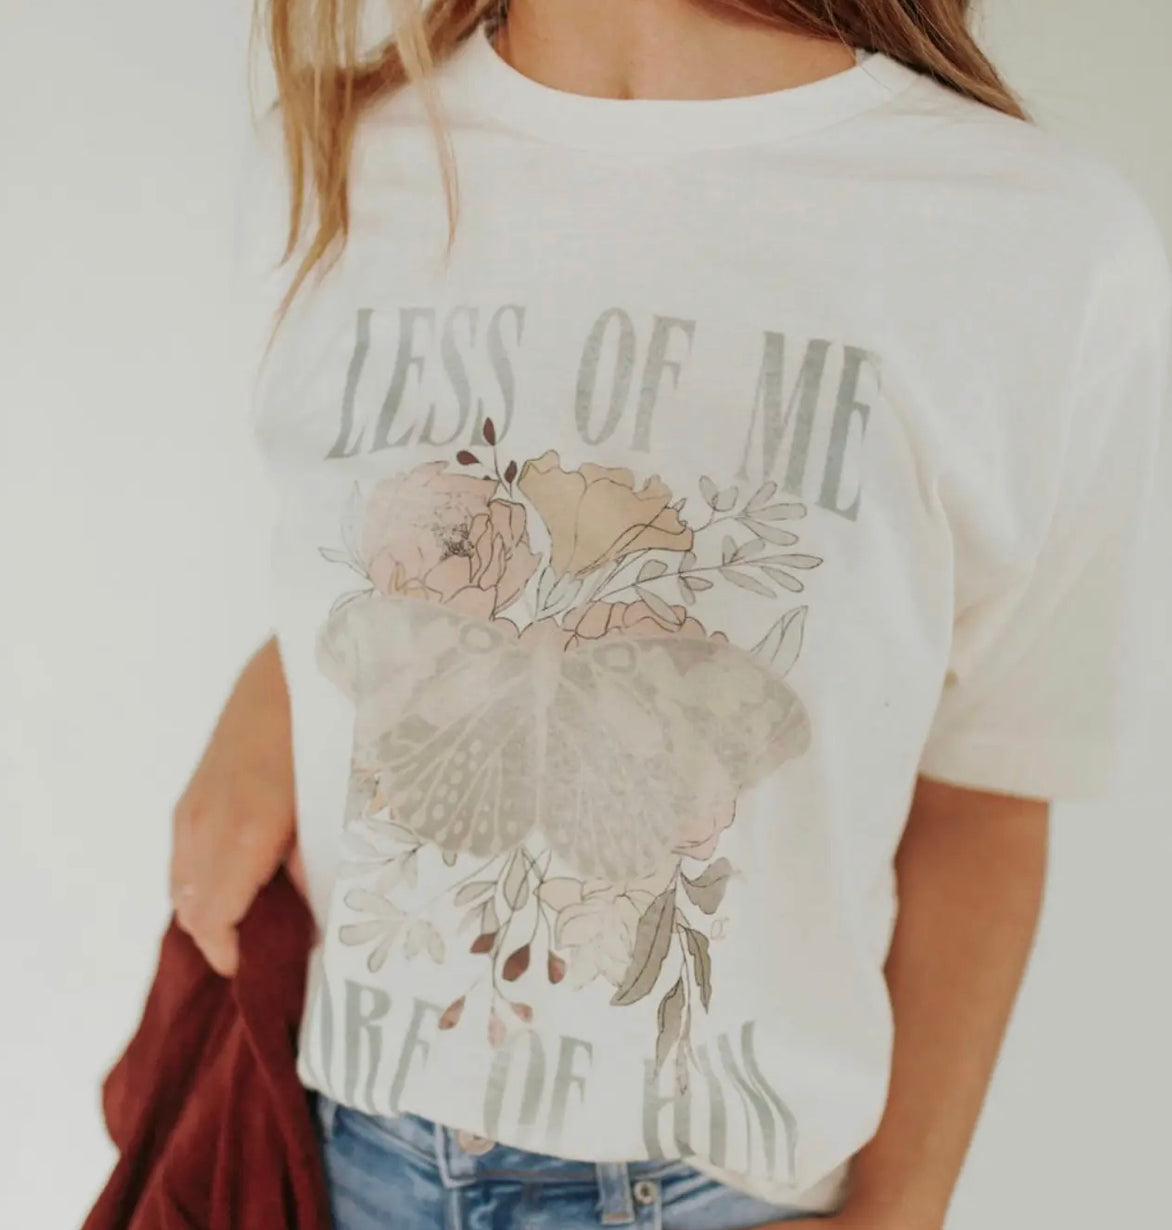 Less Of Me More Of Him Graphic Tee